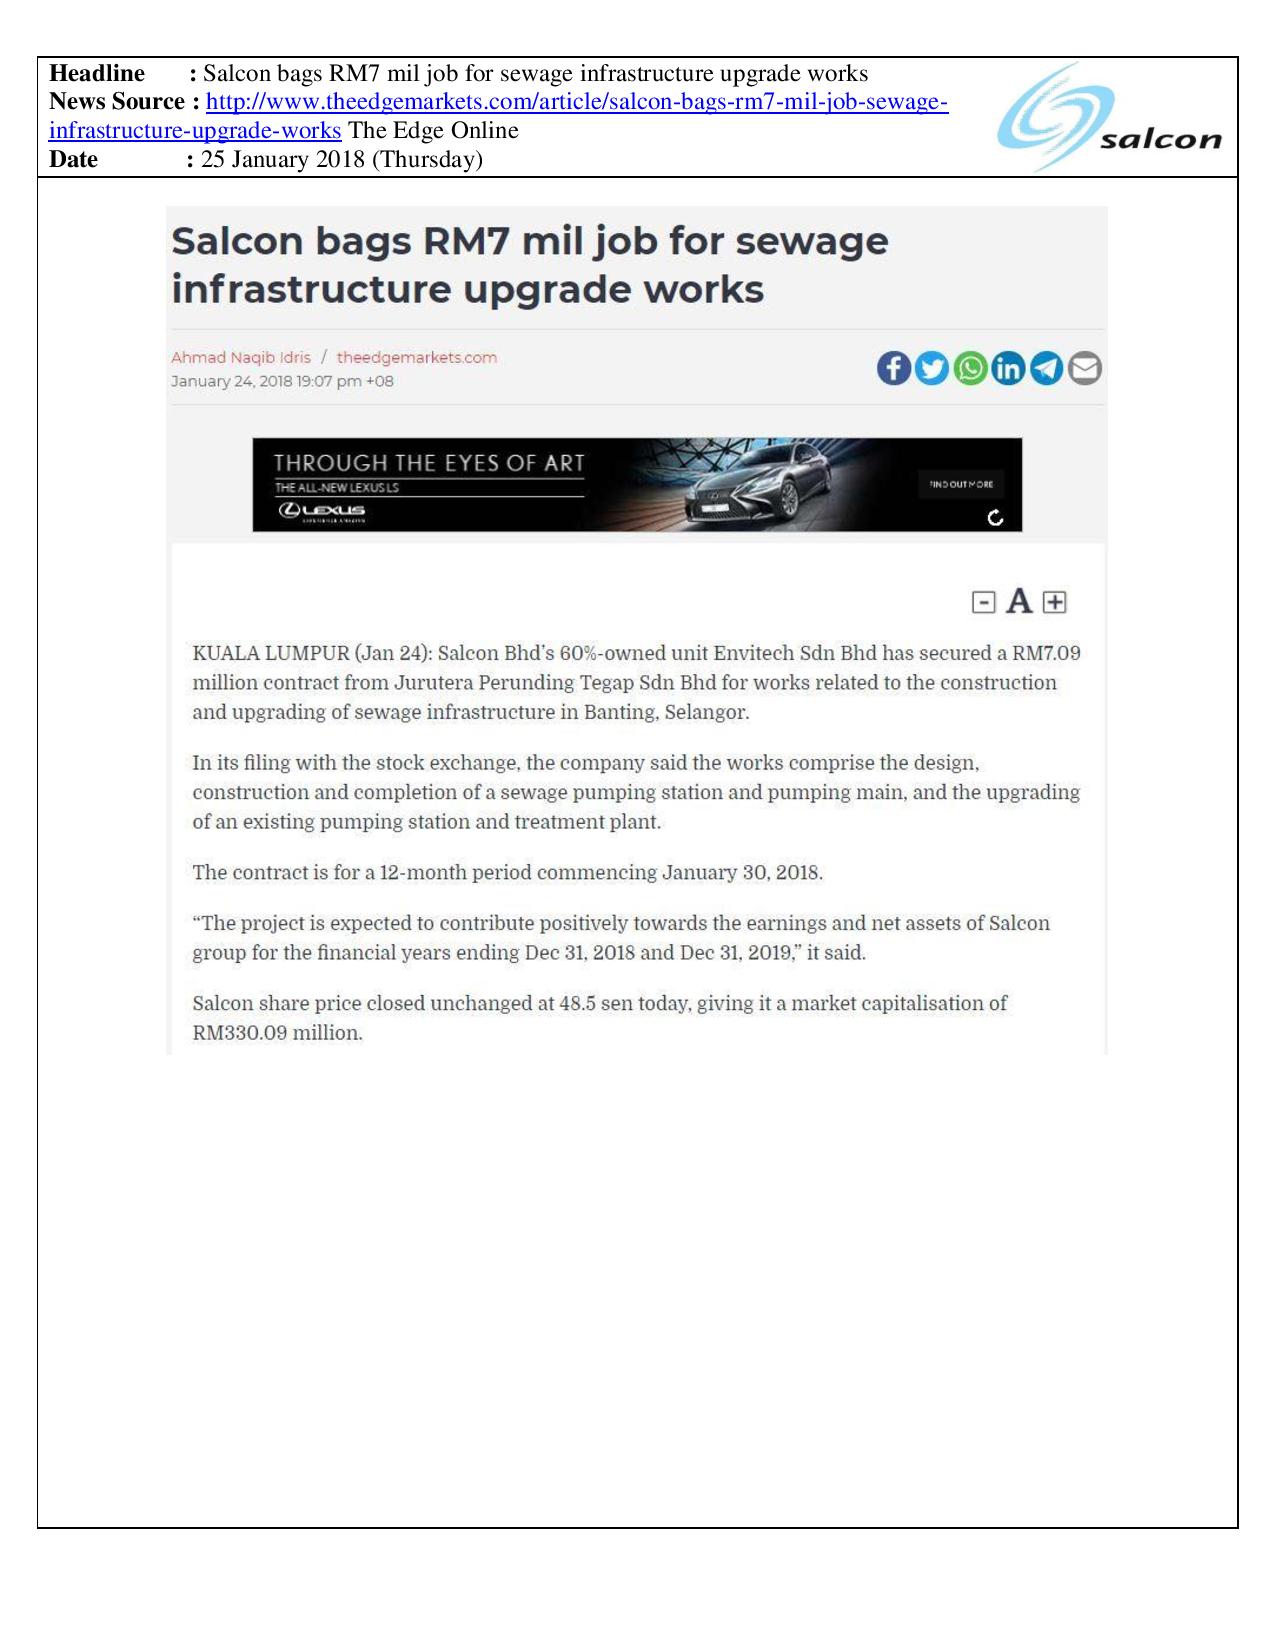 Salcon bags RM7 mil job for sewage infrastructure upgrade works